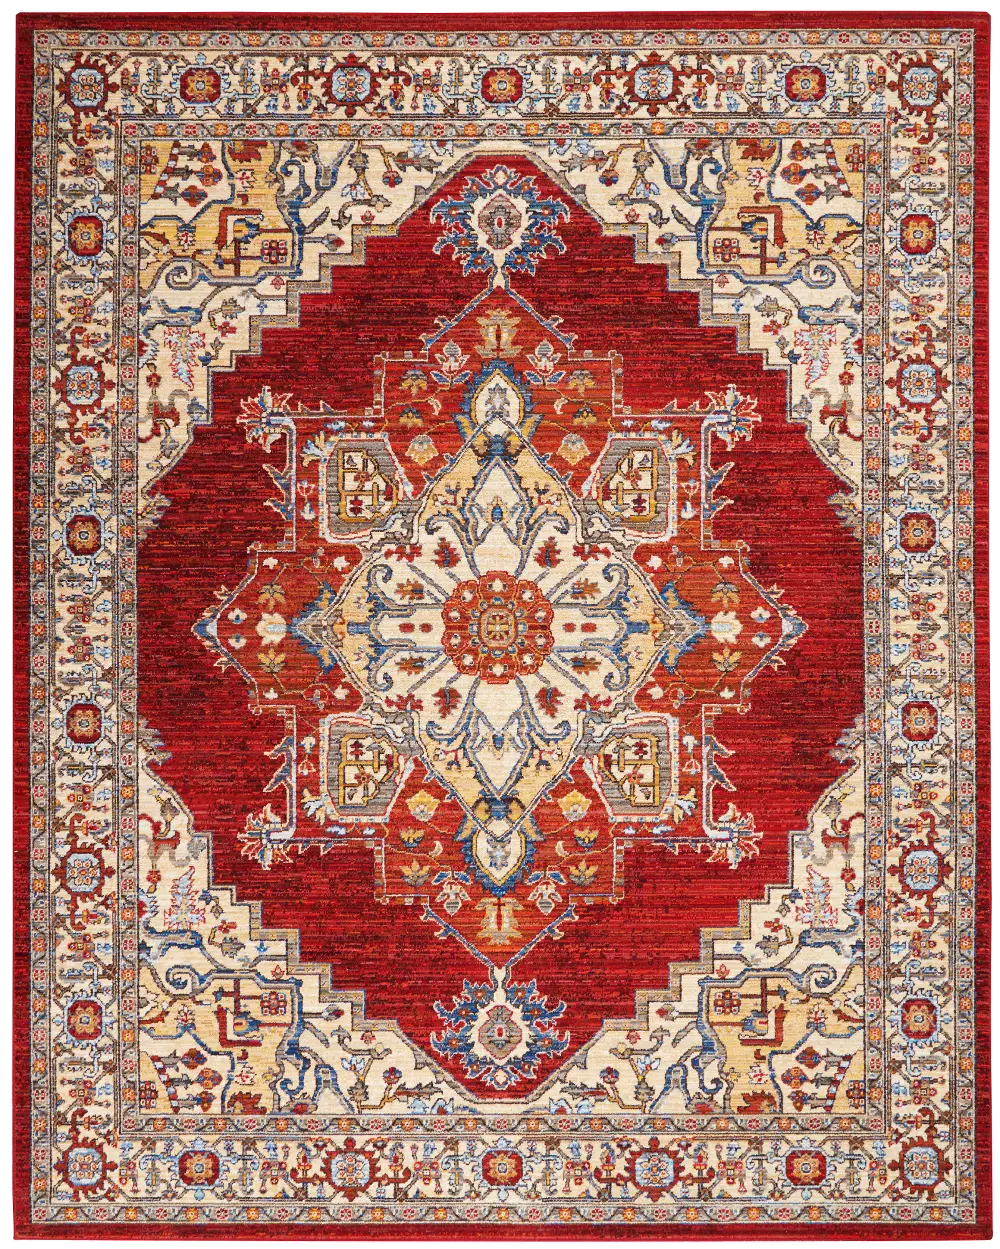 8 x 10 Large Persian Red Area Rug - Majestic-1